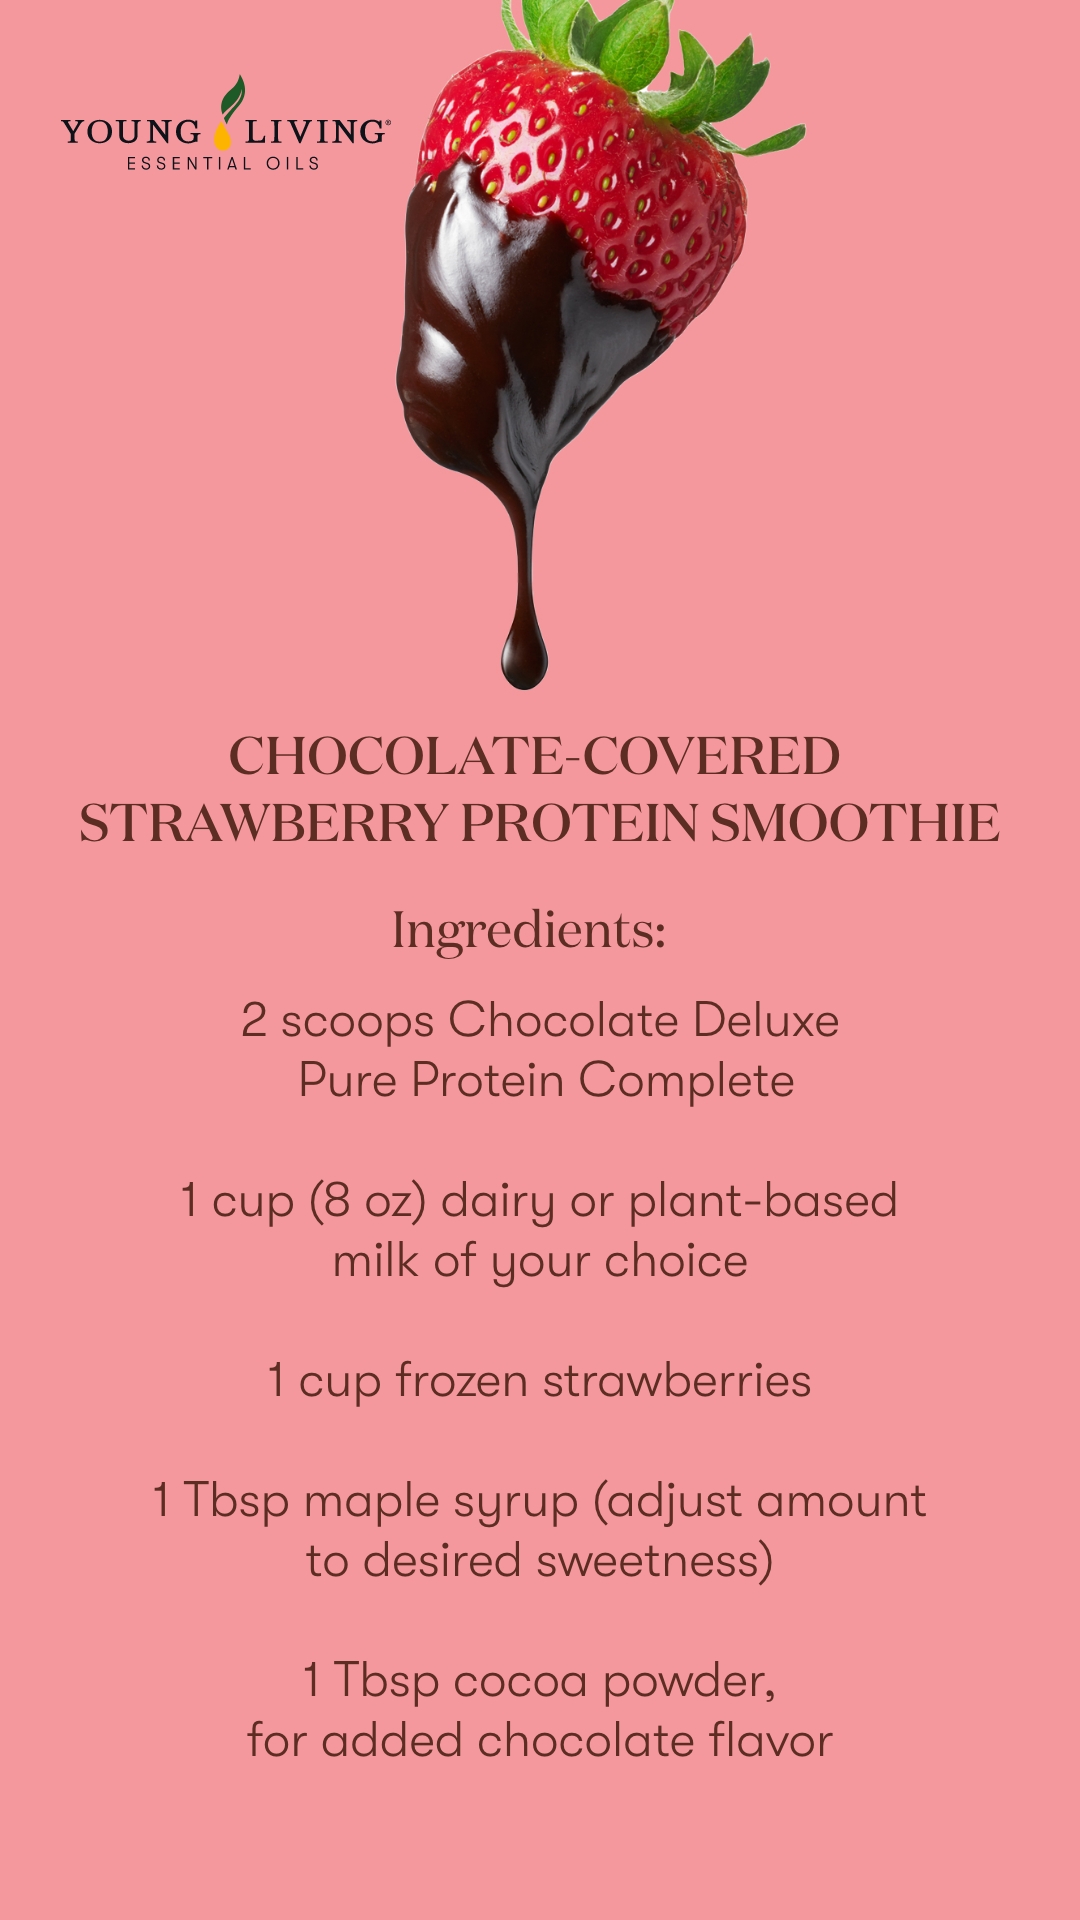 Chocolate-Covered Strawberry protein smoothie recipe - Young Living Lavender Life Blog